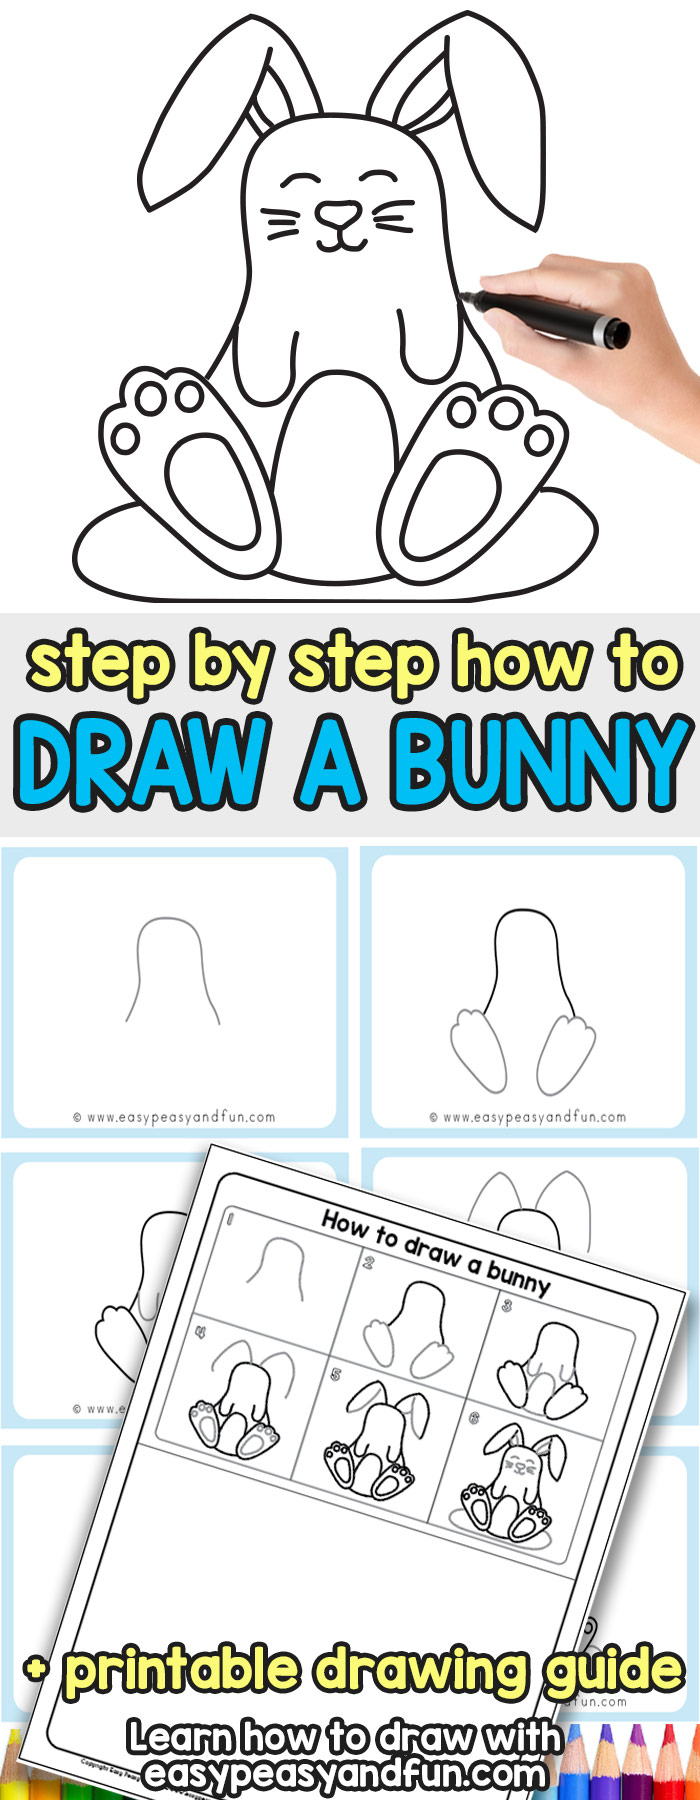 Learn how to draw a bunny. Simple step by step tutorial that will show you how to draw an easy and cute little bunny.